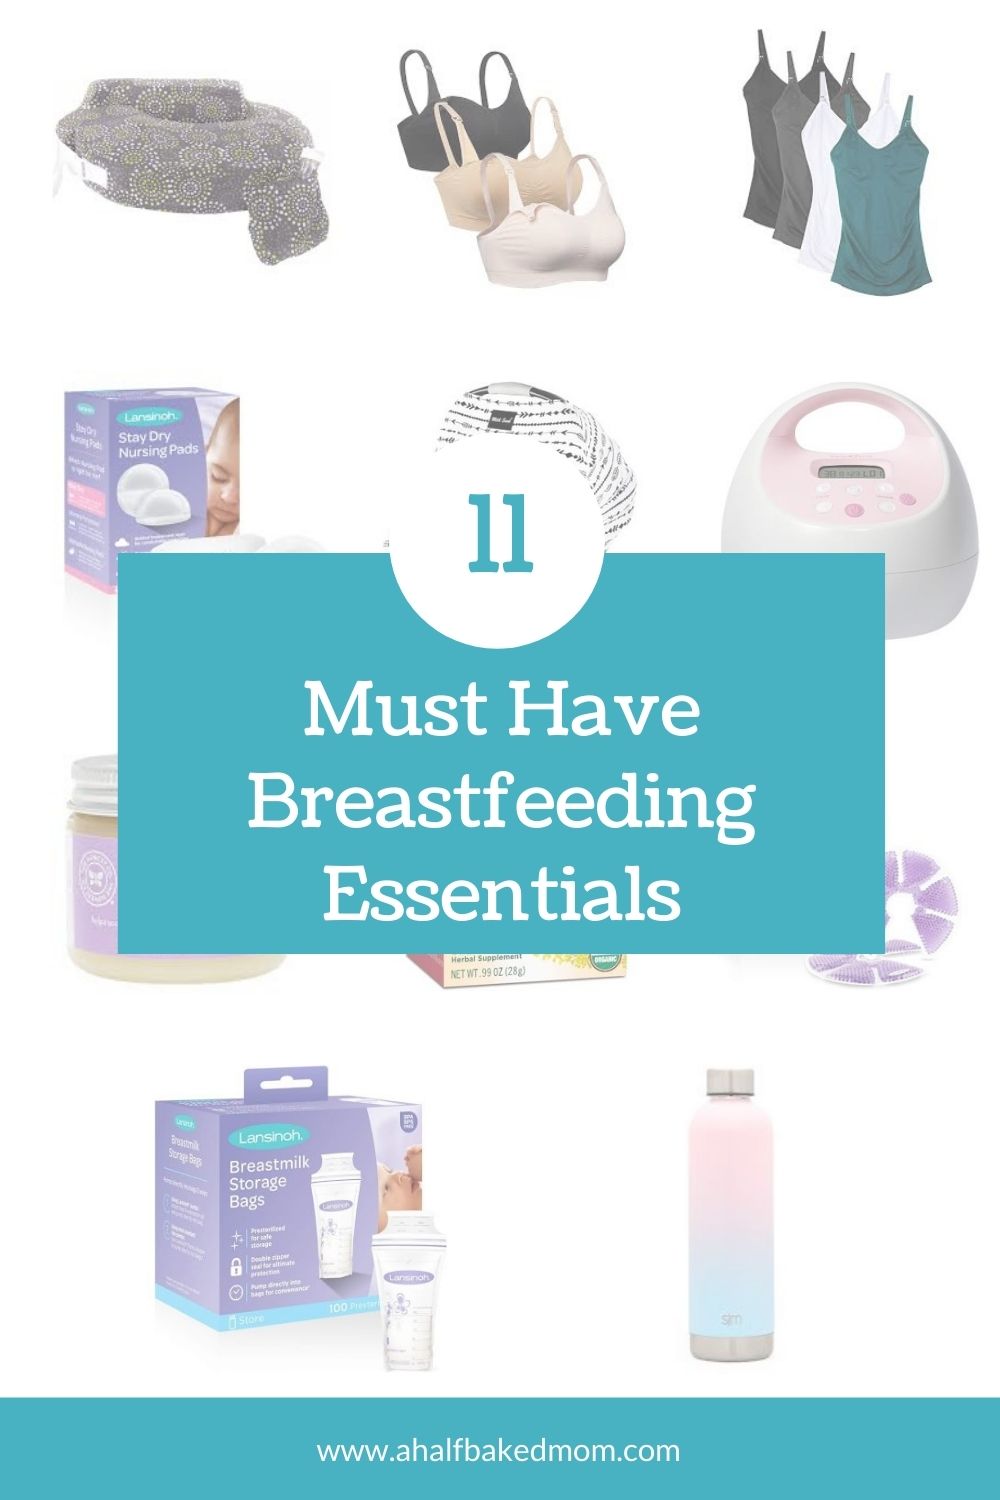 21 Breastfeeding Must Haves: Essential Equipment, Clothes & Accessories -  The Confused Millennial